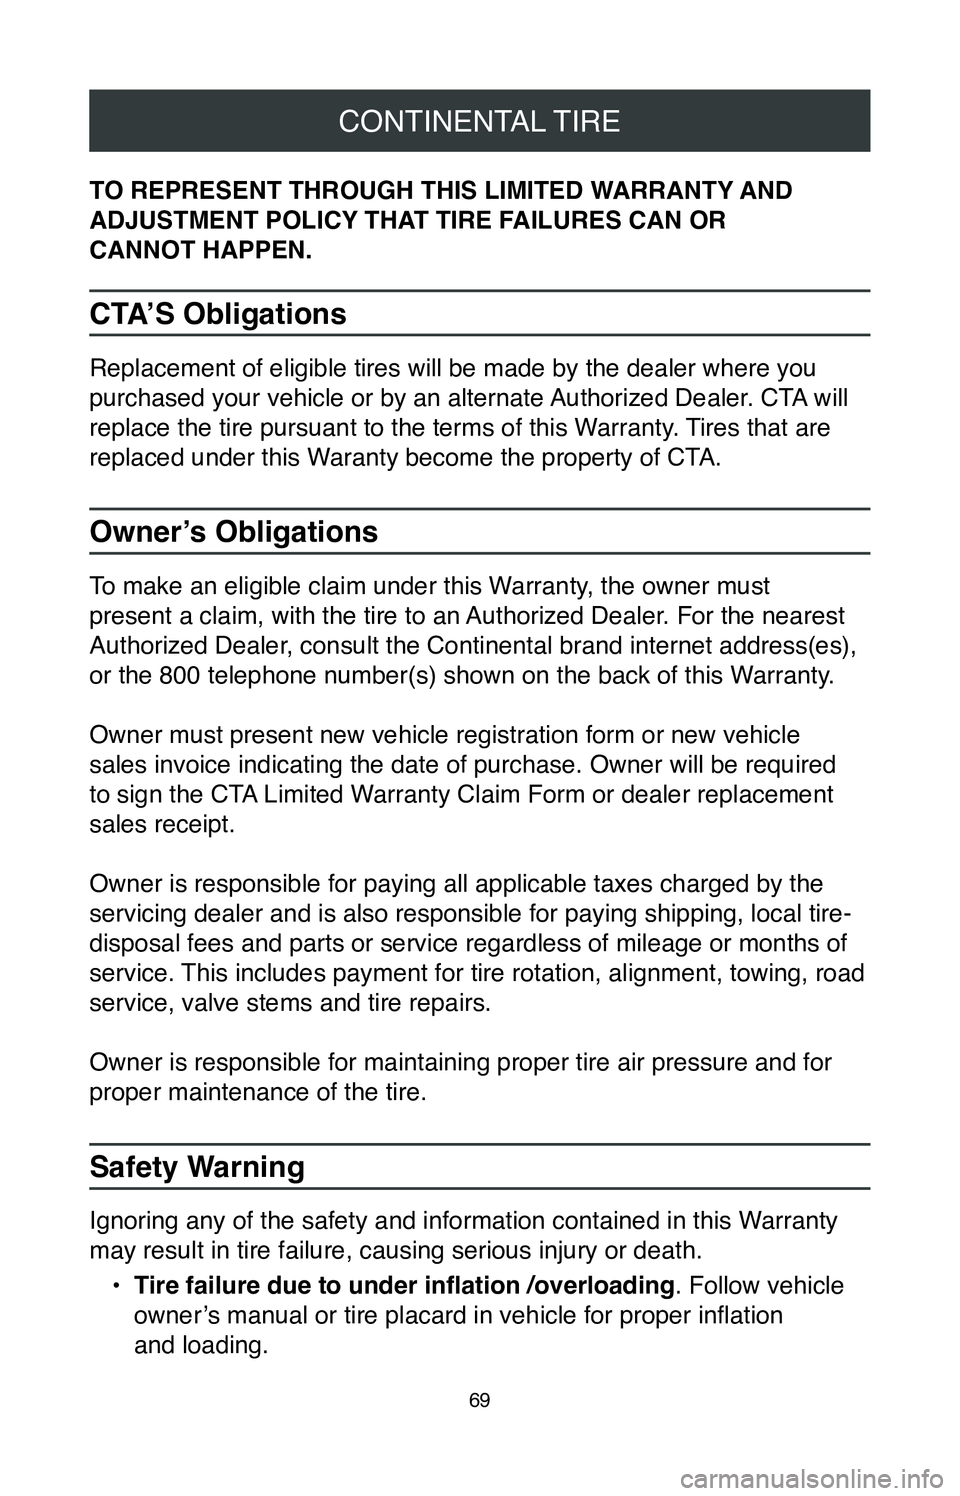 TOYOTA CAMRY 2020  Warranties & Maintenance Guides (in English) CONTINENTAL TIRE
69
TO REPRESENT THROUGH THIS LIMITED WARRANTY AND 
ADJUSTMENT POLICY THAT TIRE FAILURES CAN OR  
CANNOT HAPPEN.
CTA’S Obligations
Replacement of eligible tires will be made by the d